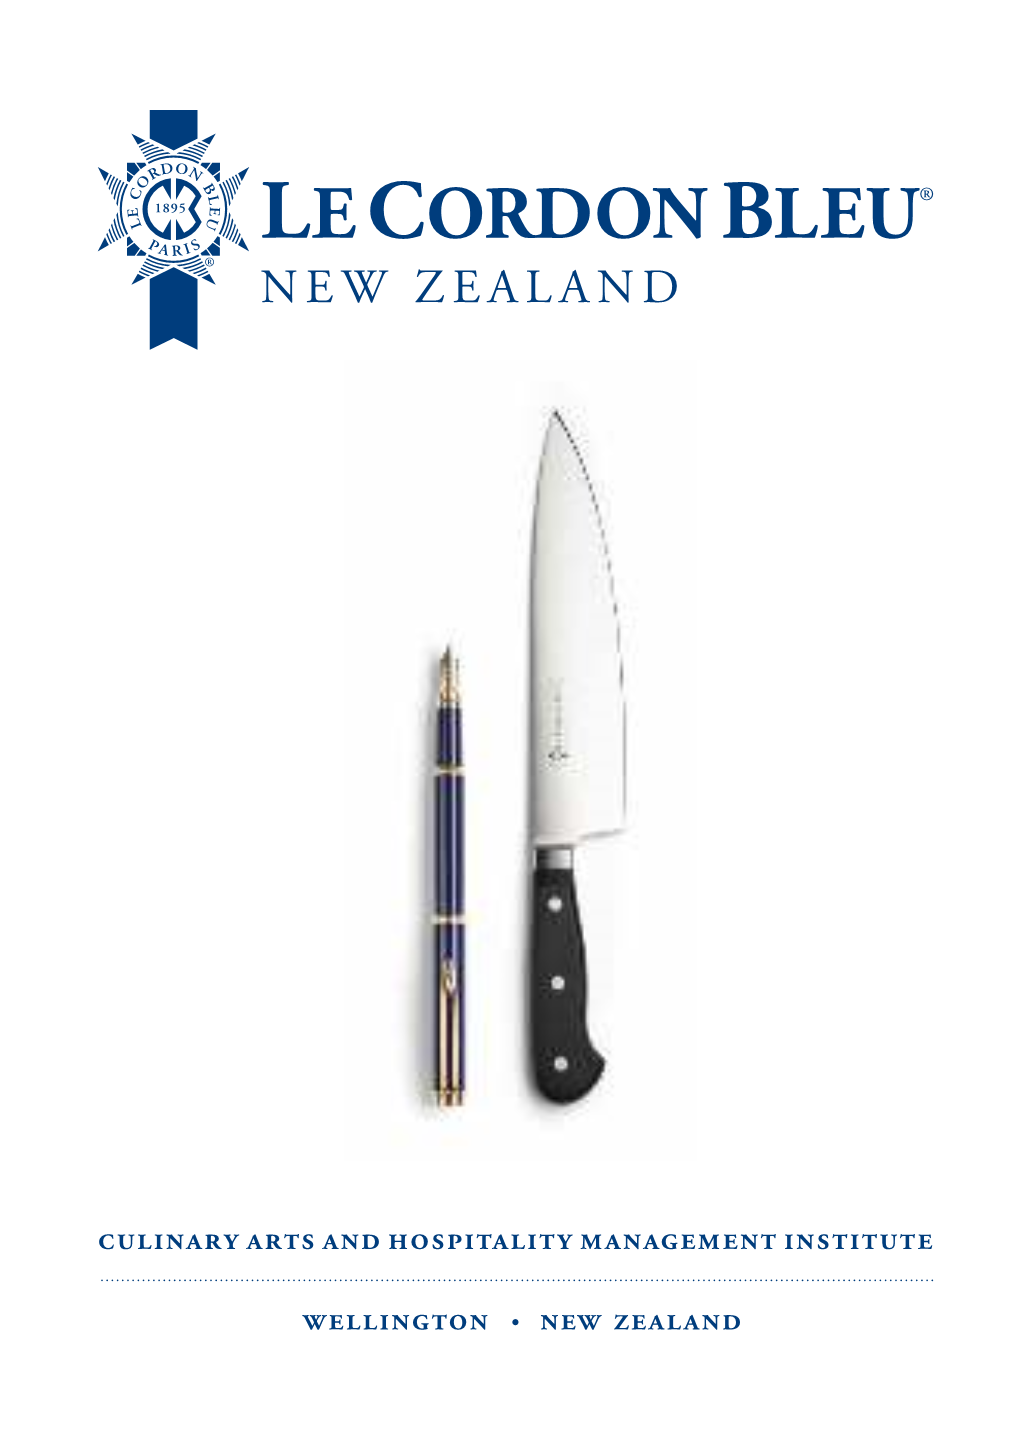 Bonjour and Welcome to Le Cordon Bleu New Zealand